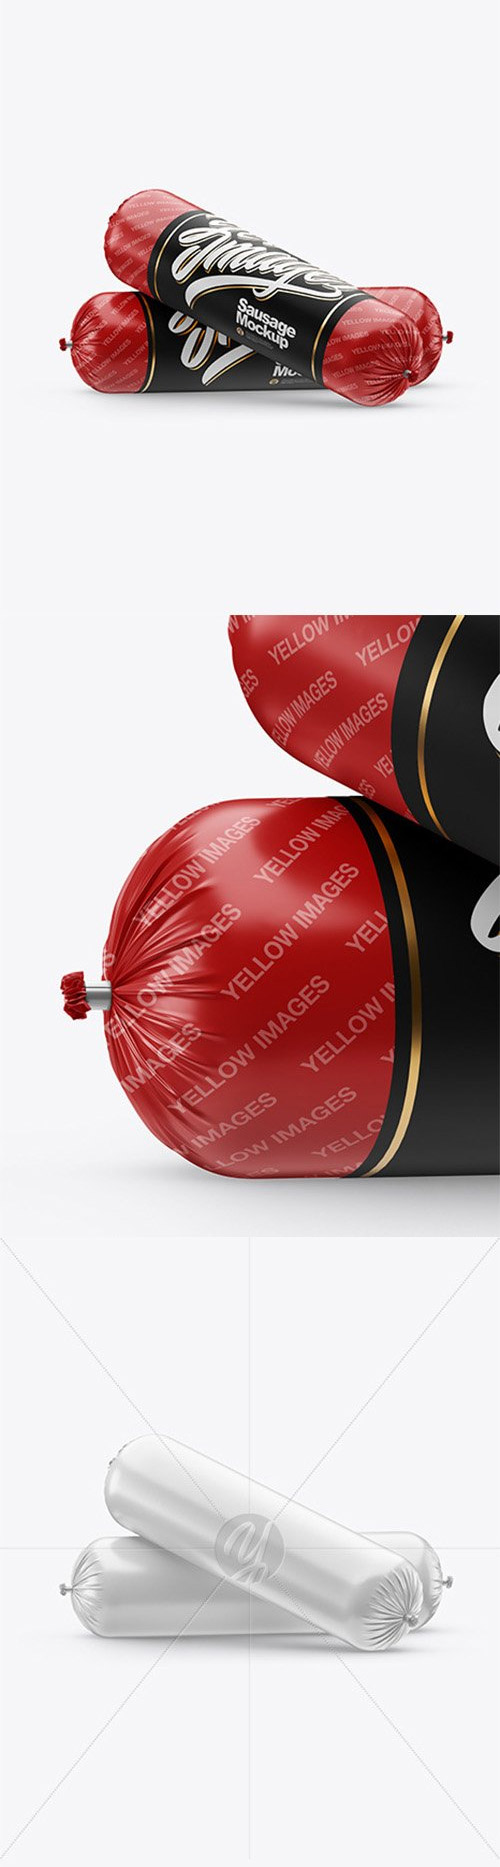 Two Glossy Sausages Mockup 44210